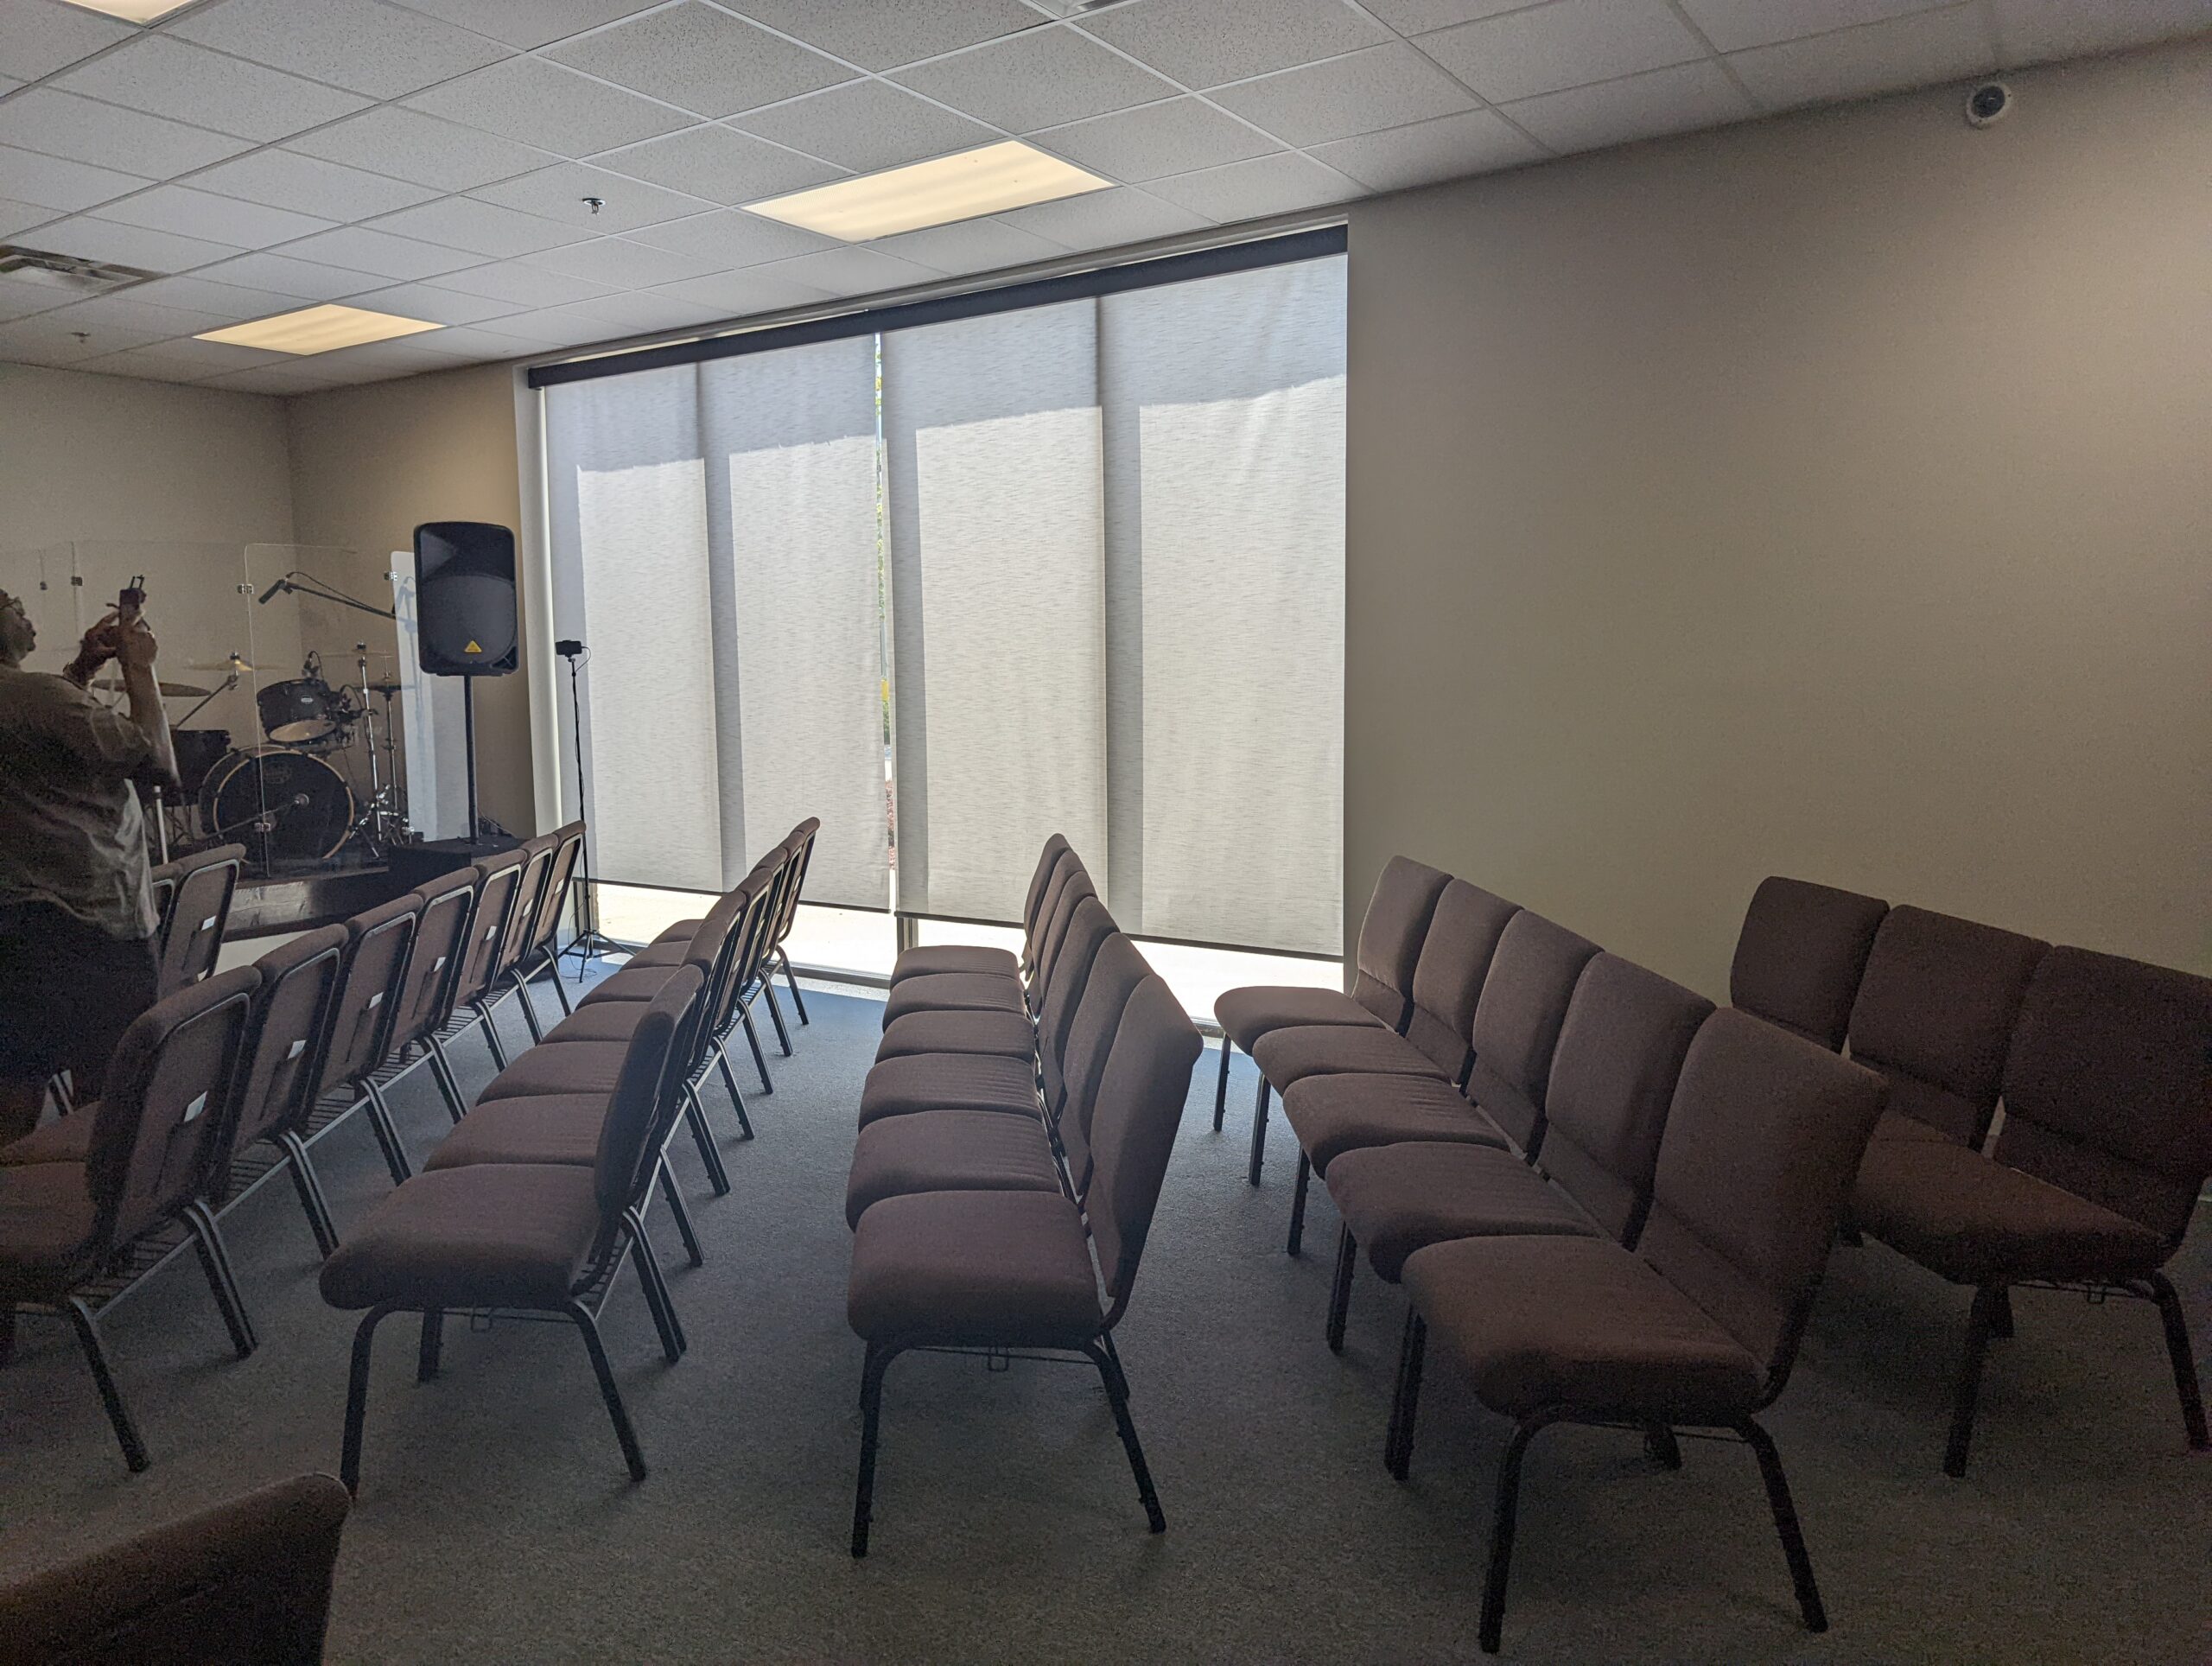 motorized roller shades for a church